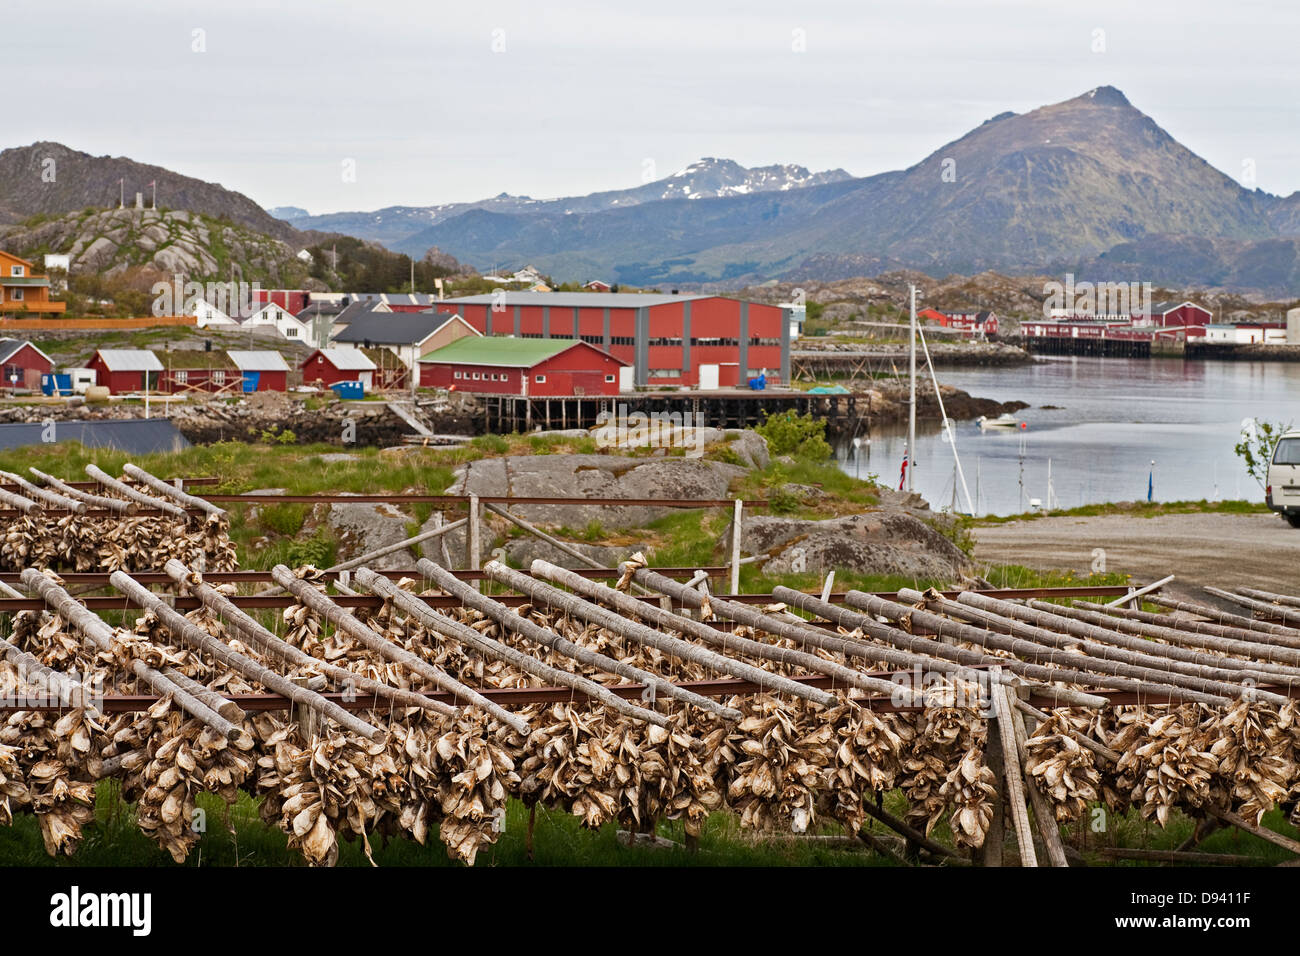 Fishing village with cod and haddock fish drying on rack Stock Photo